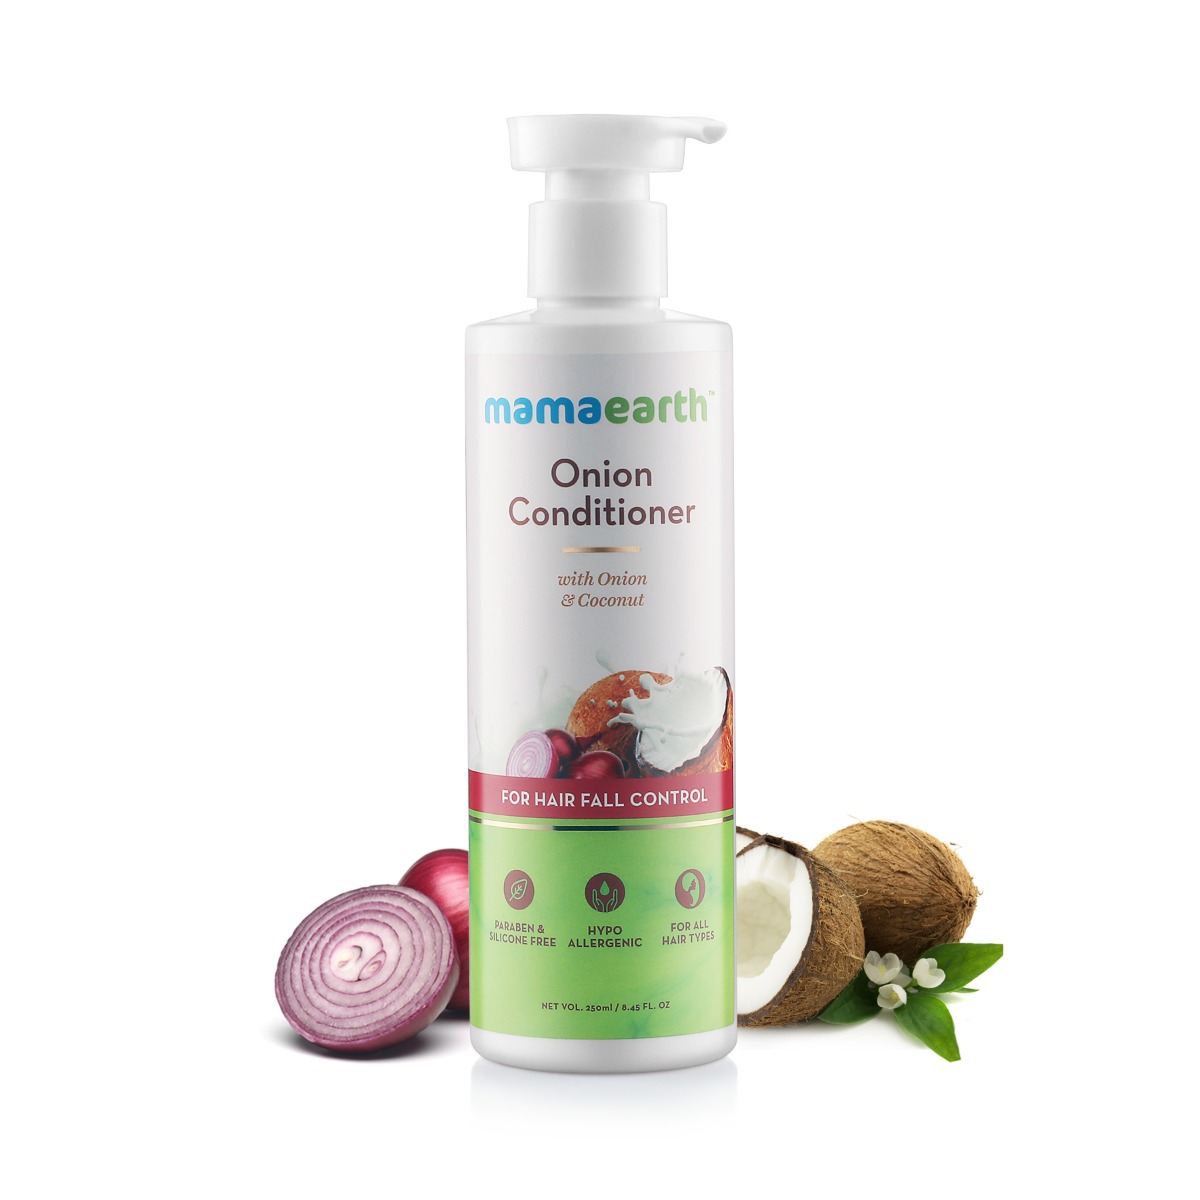 MamaEarth Onion Conditioner for Hair Growth & Hair Fall Control with Onion & Coconut